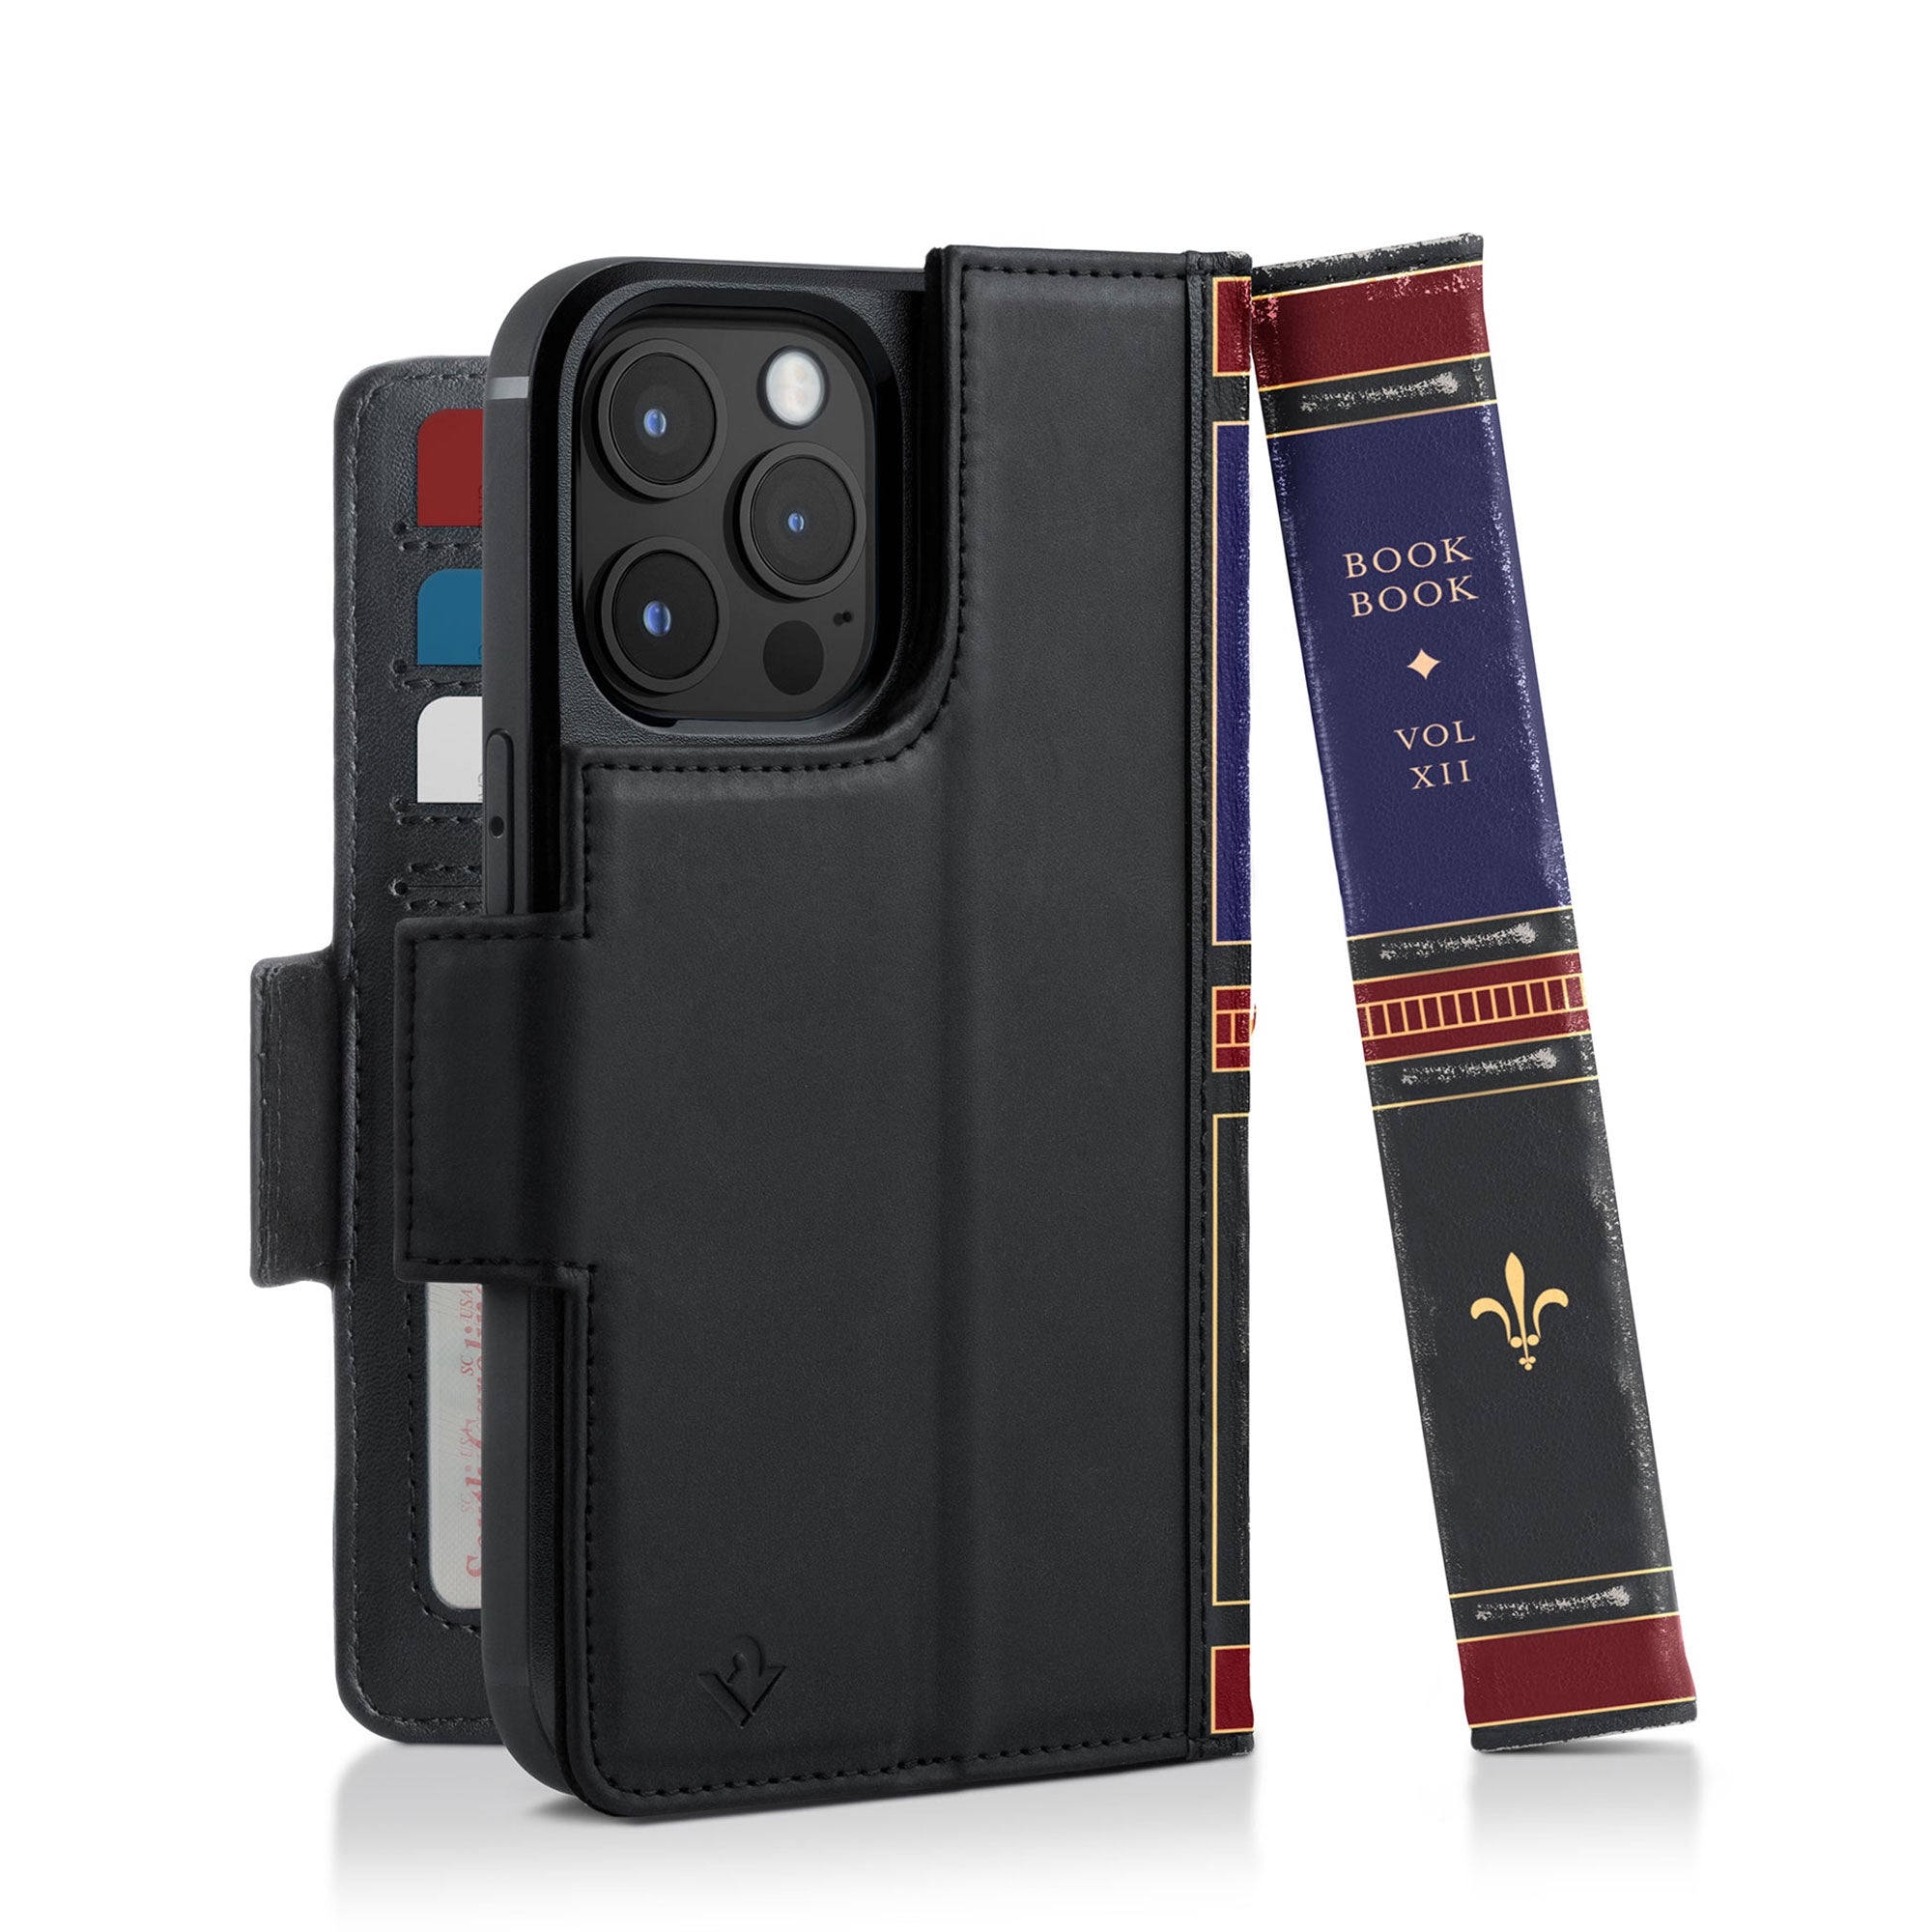 Alternatief voorstel Scorch Opvoeding BookBook vol. 2 for iPhone | Leather wallet case with removable shell